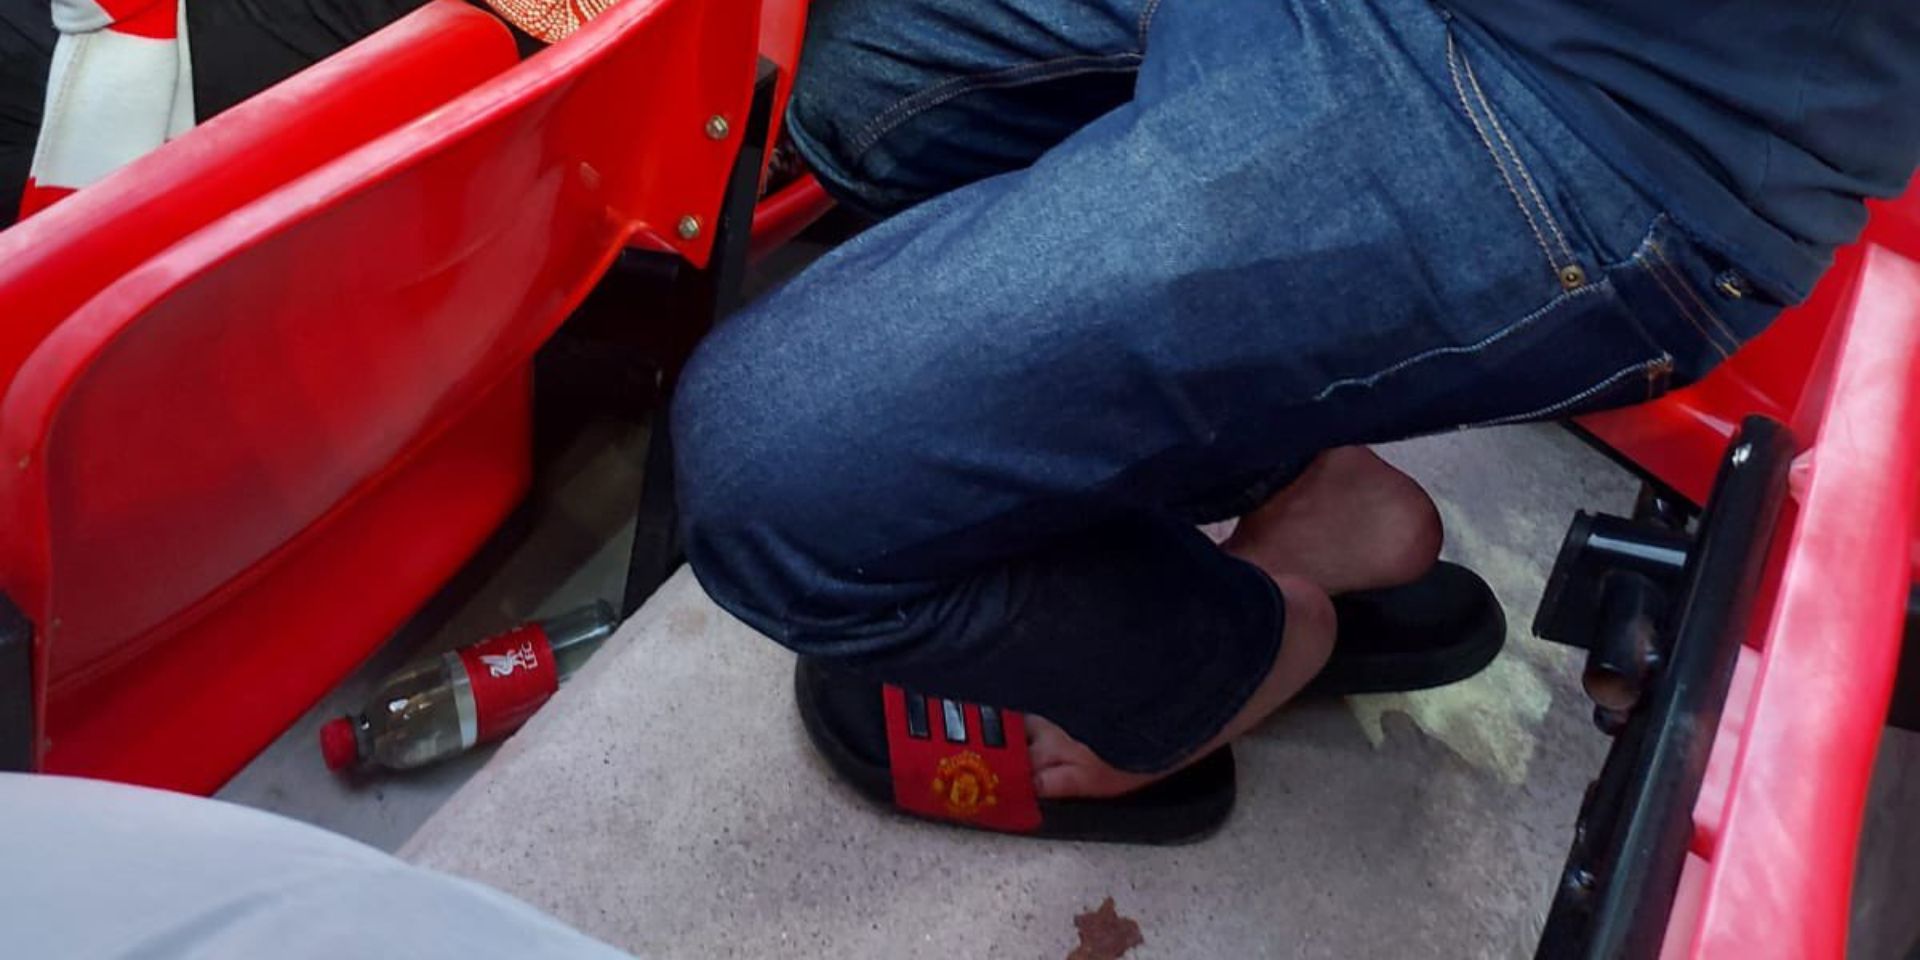 (Image) Liverpool fan spotted wearing Manchester United sliders in Anfield during match against Crystal Palace